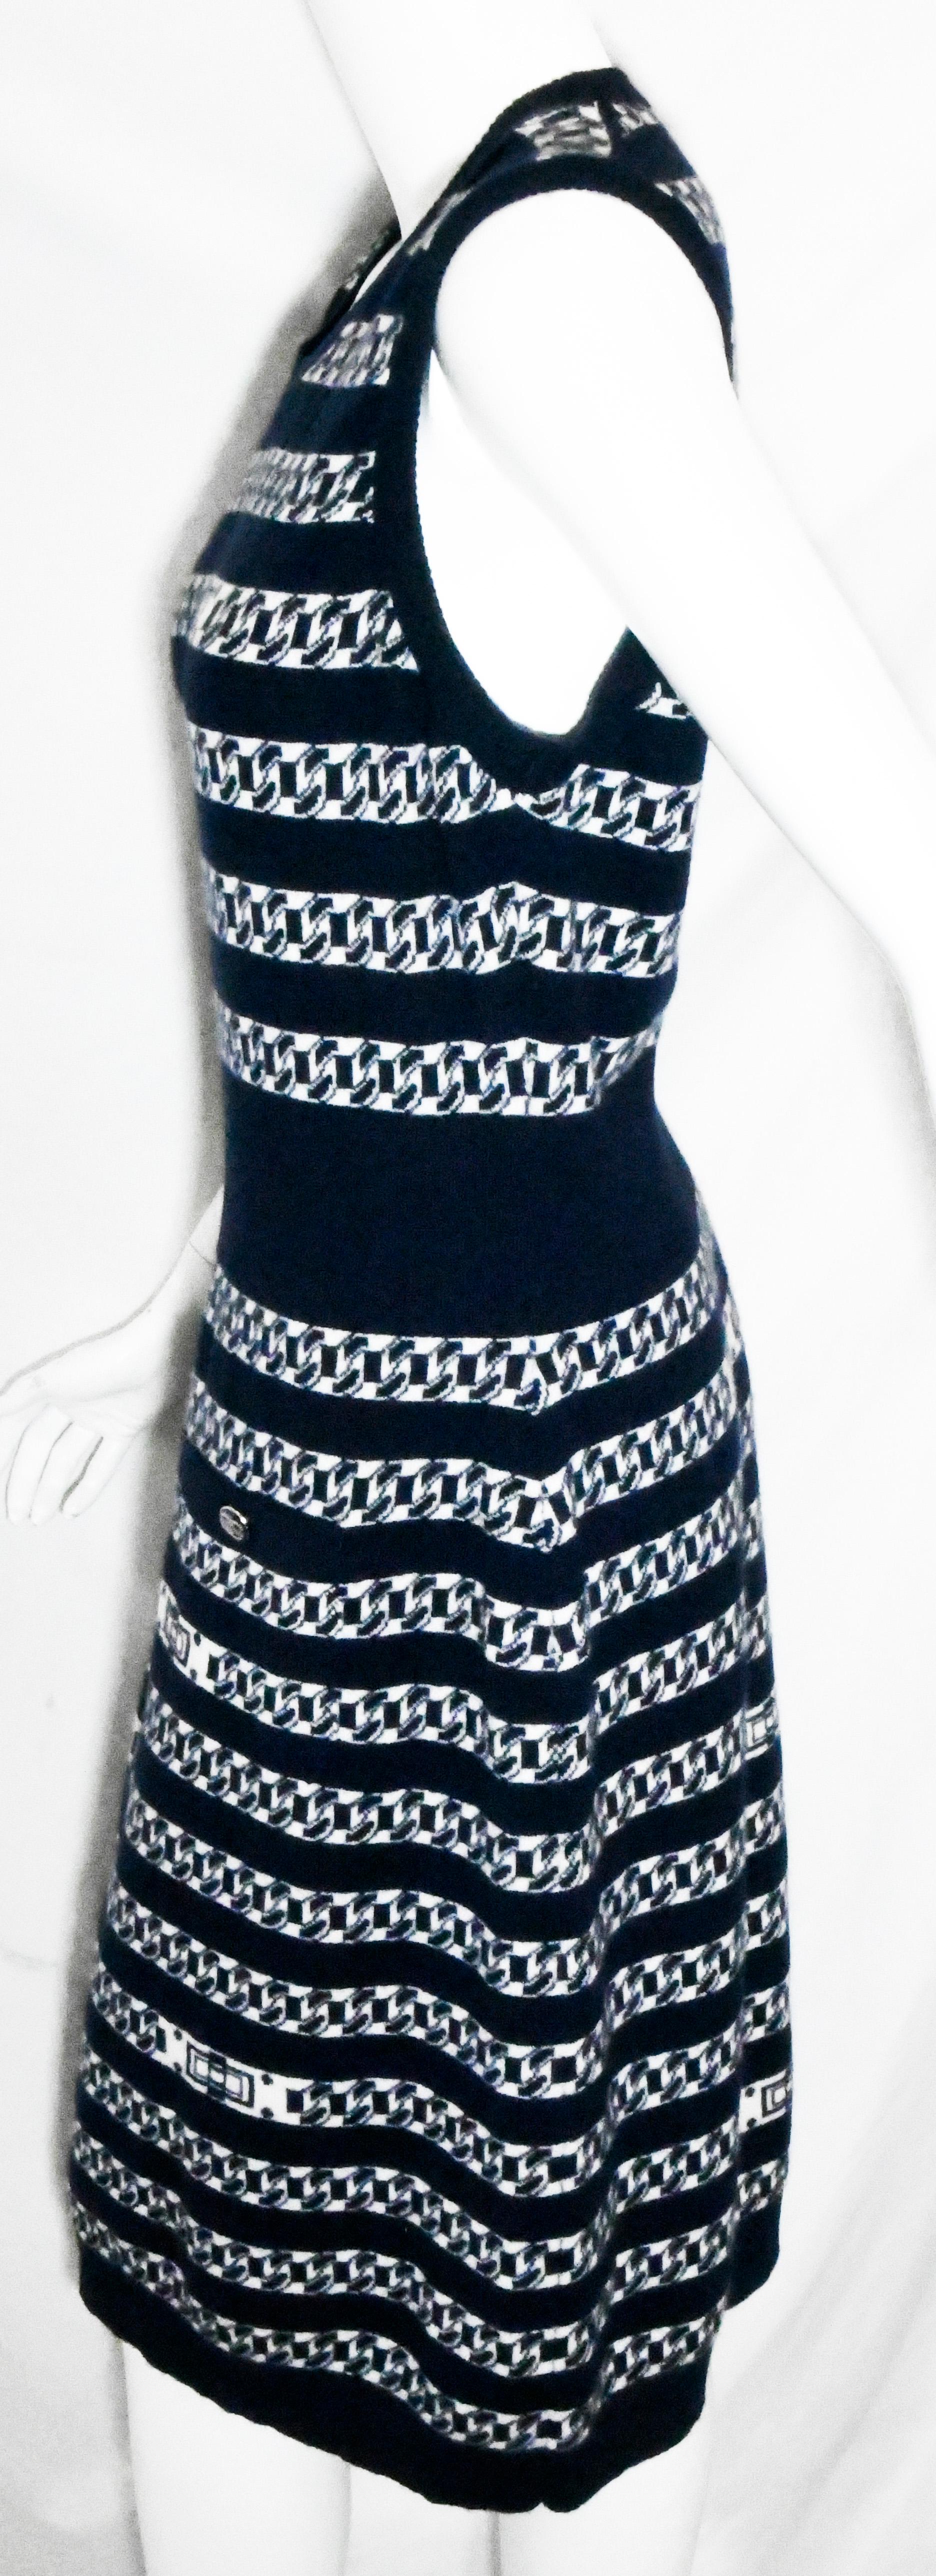 Chanel navy and white cashmere Intarsia chain link pattern knit sleeveless dress from the 2017 Spring Collection. Dress is knitted in a striped design with alternating navy and white and white with navy throughout.  Dress is unlined and includes